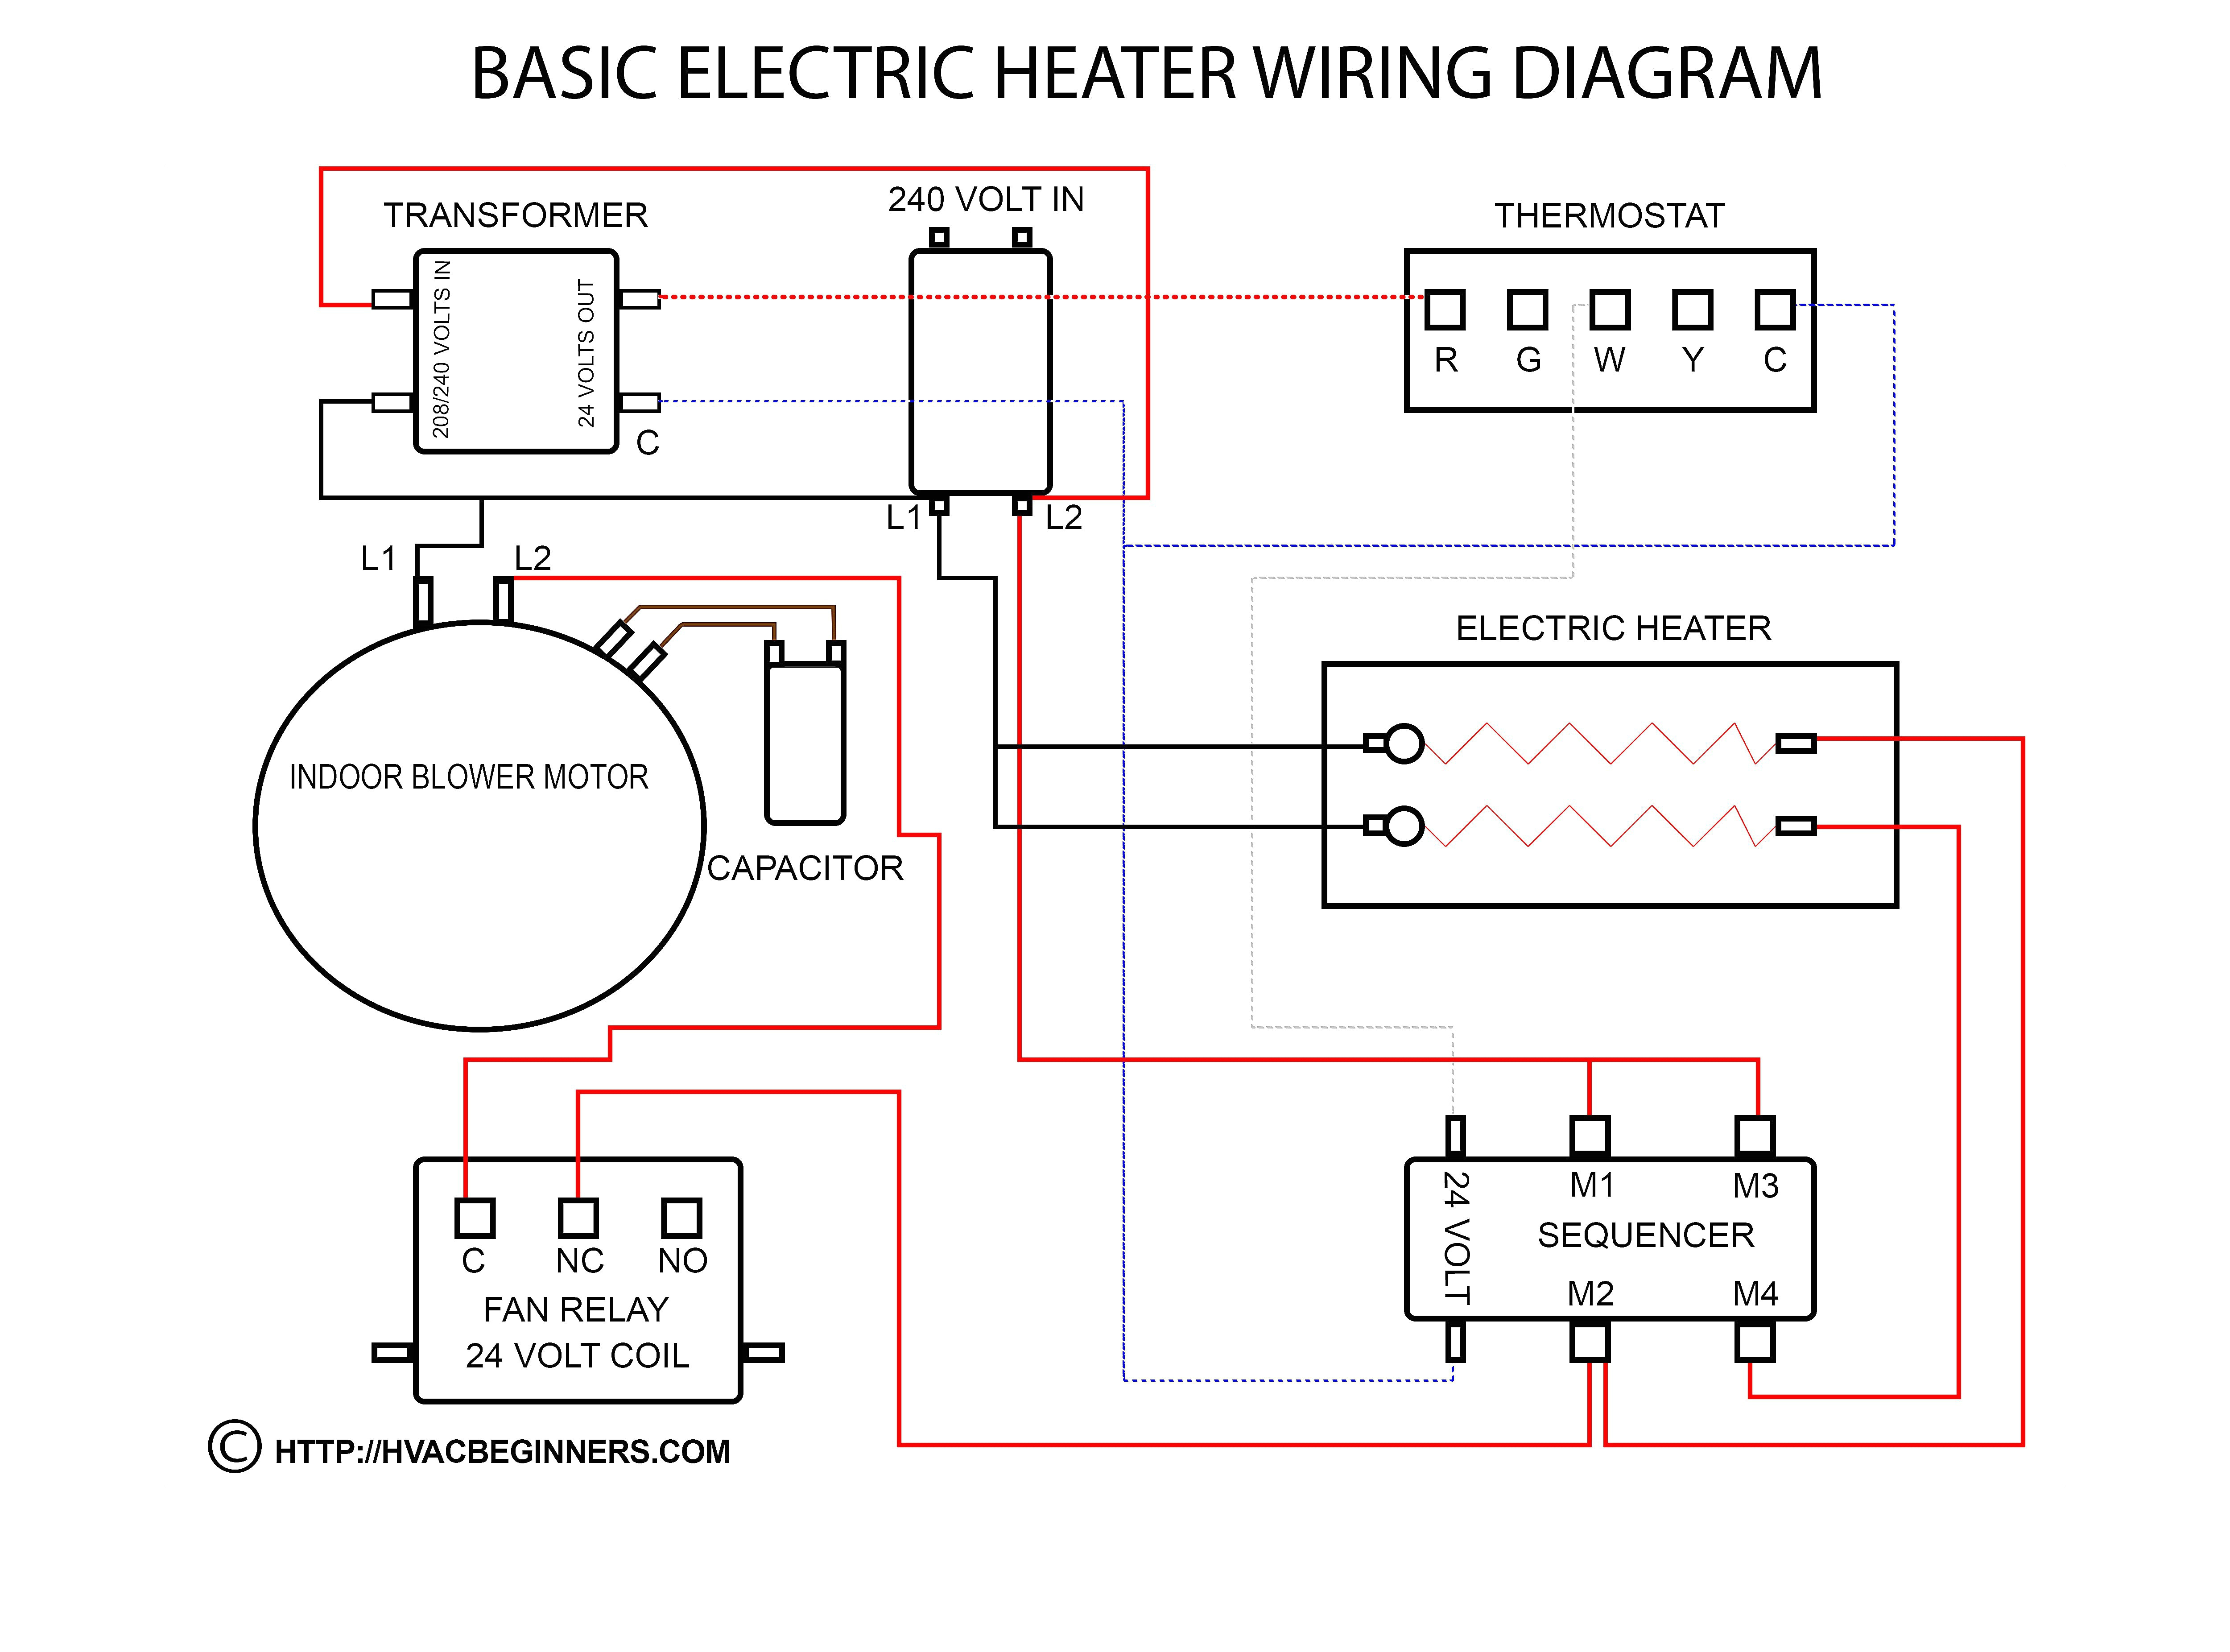 a new furnace motor wiring wiring diagram gofurnace blower wiring diagram 240 data diagram schematic a